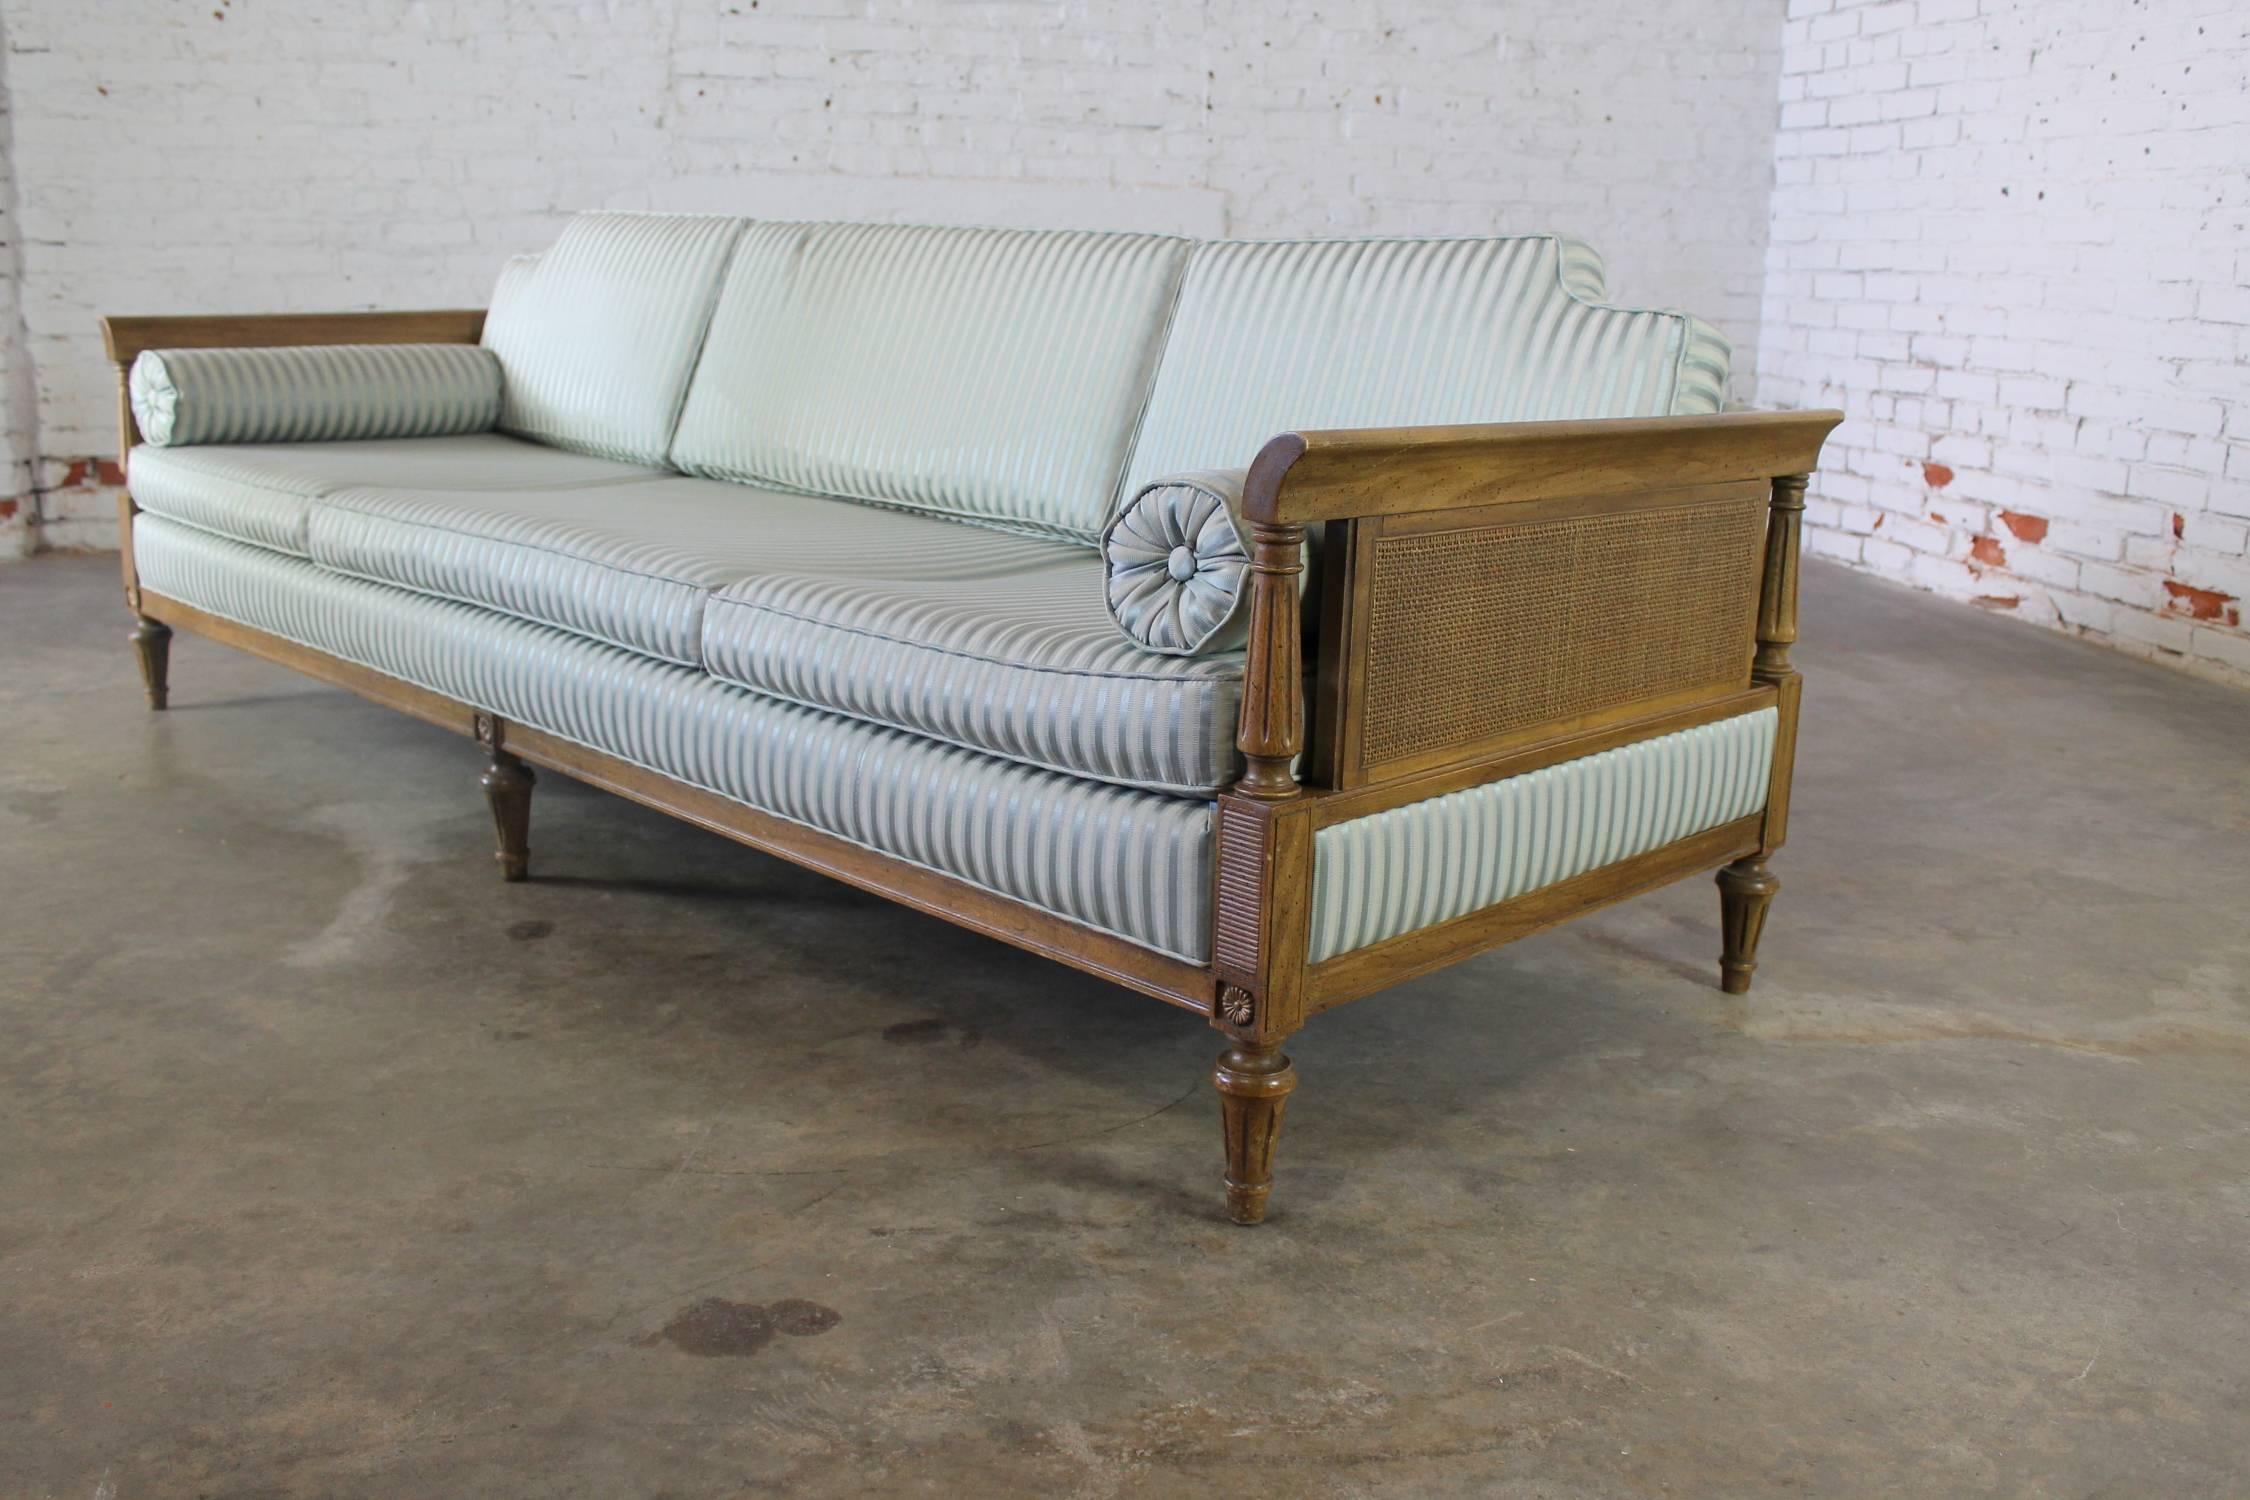 Vintage Hollywood Regency Neoclassic Sofa with Caned Sides 1